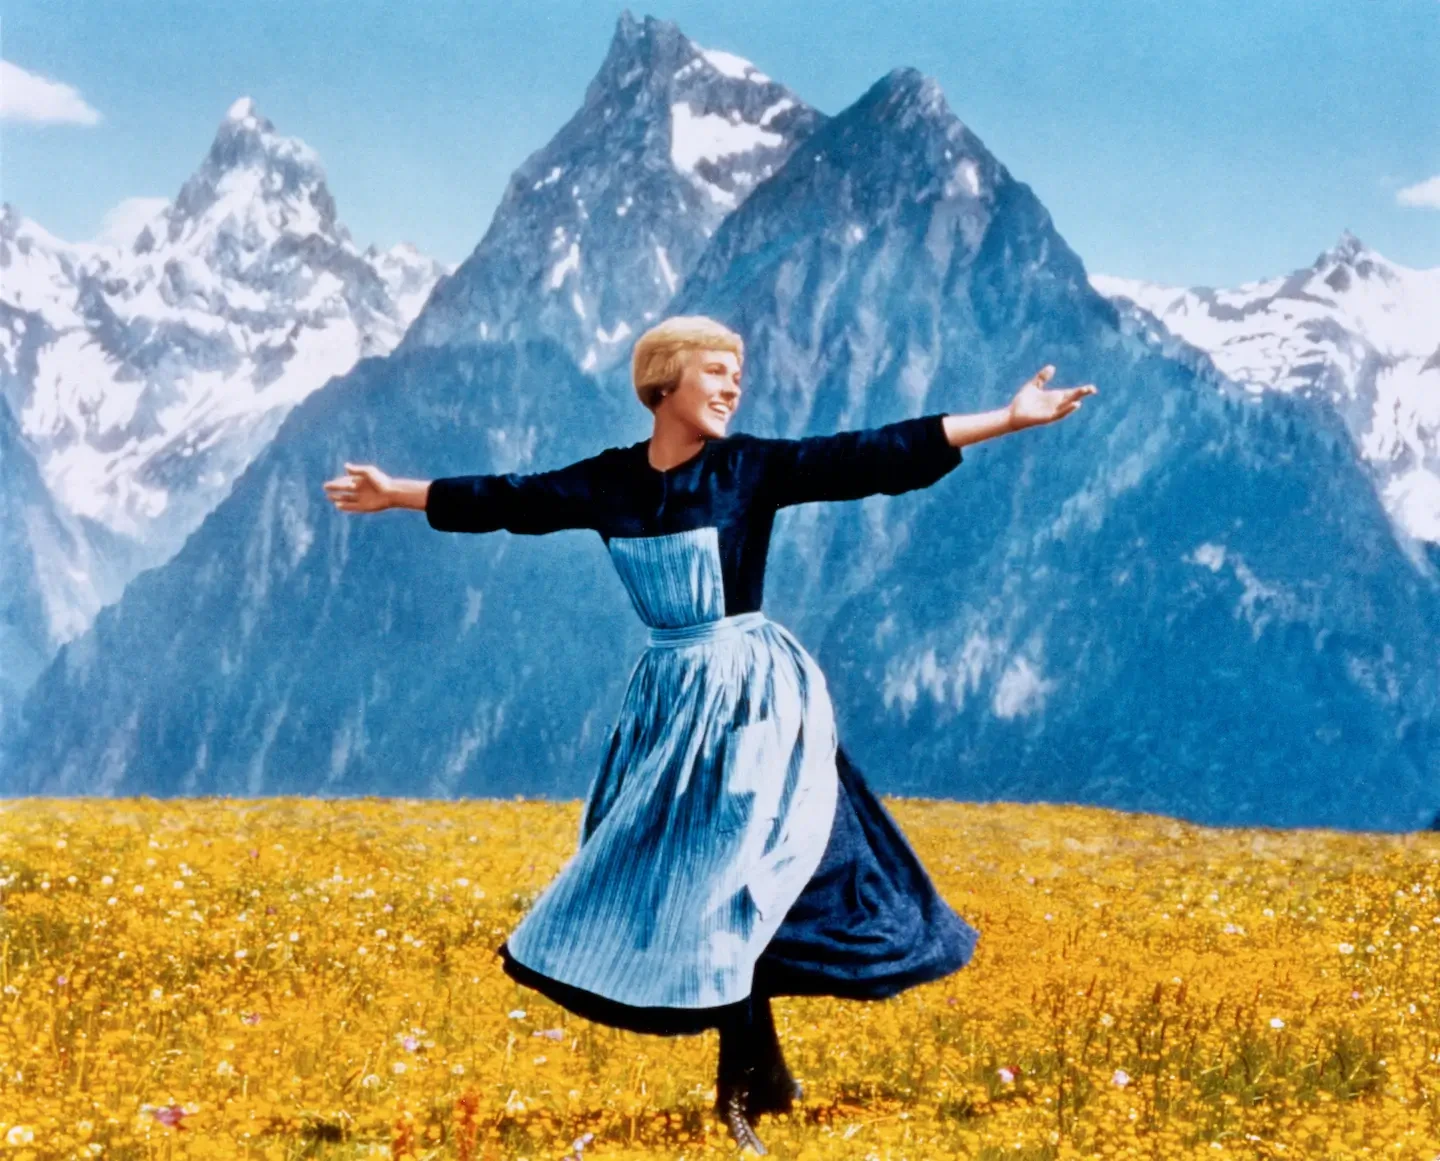 The Sound of Music is a 'mum favorite'